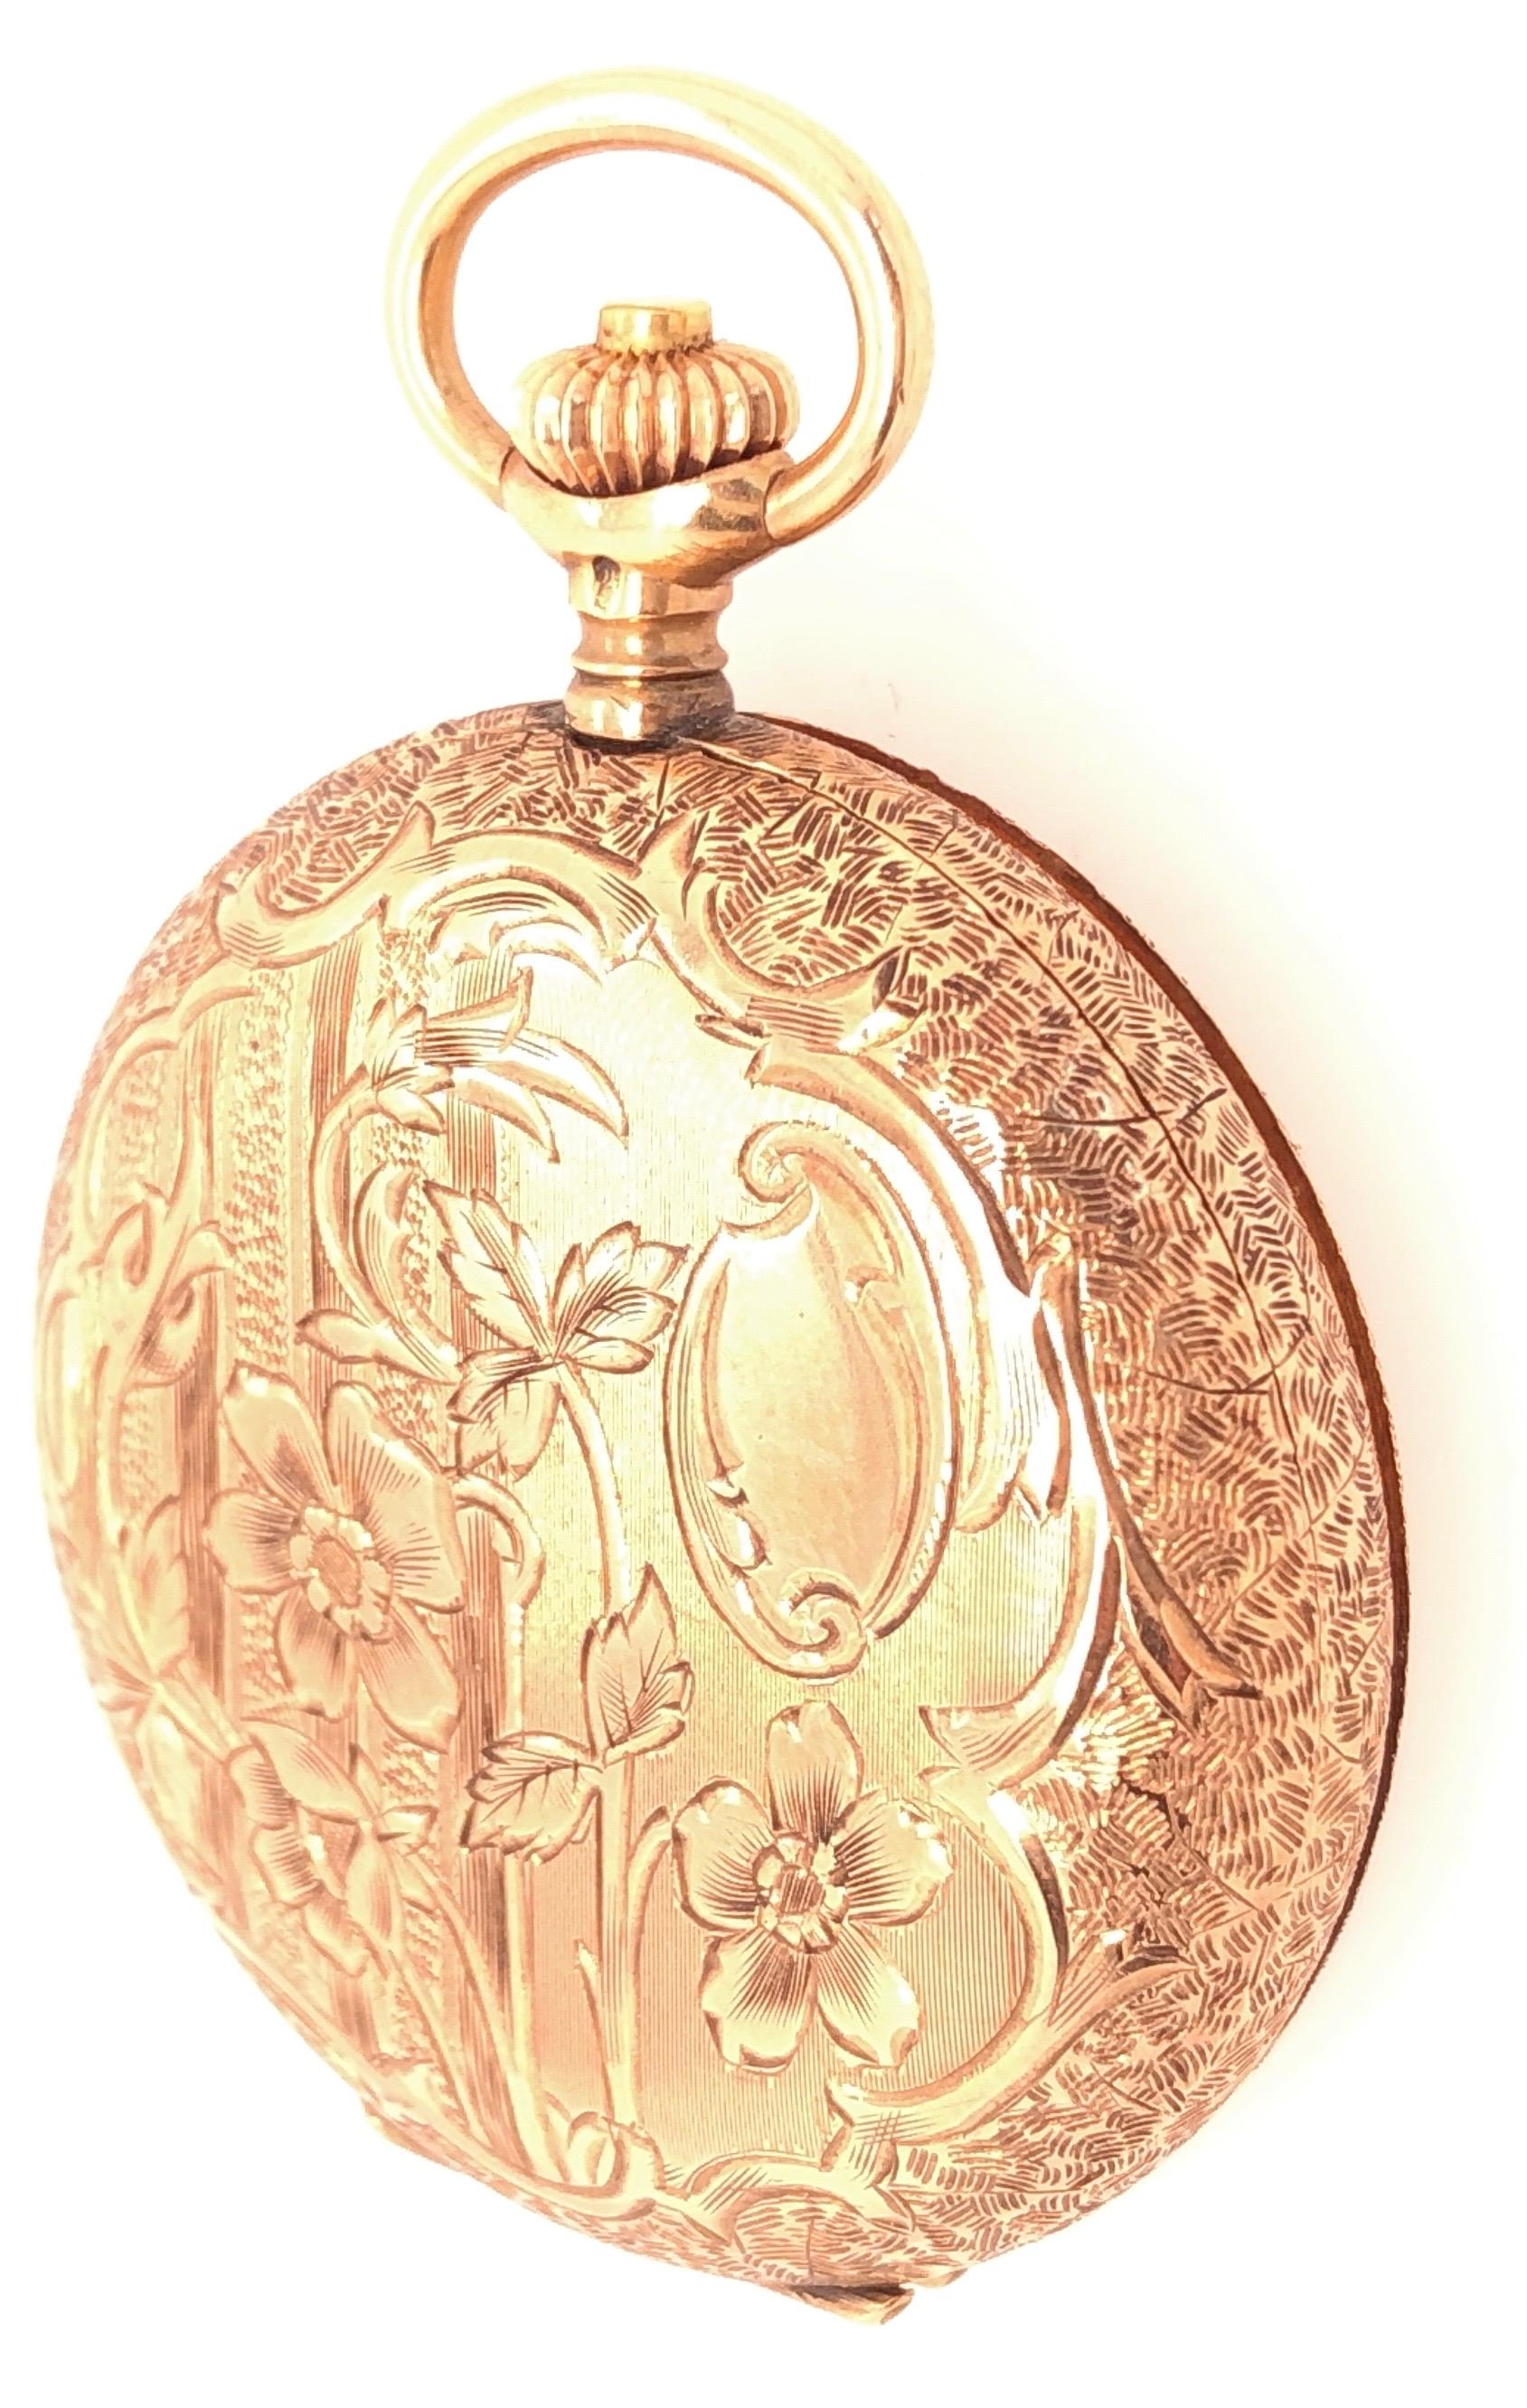 14 Karat Yellow Gold Omega Grand Prix 1900 Pocket Watch. Fine Working Condition. 
14 karat round polished case, white dial marked with Roman numerals, minutes scale, 